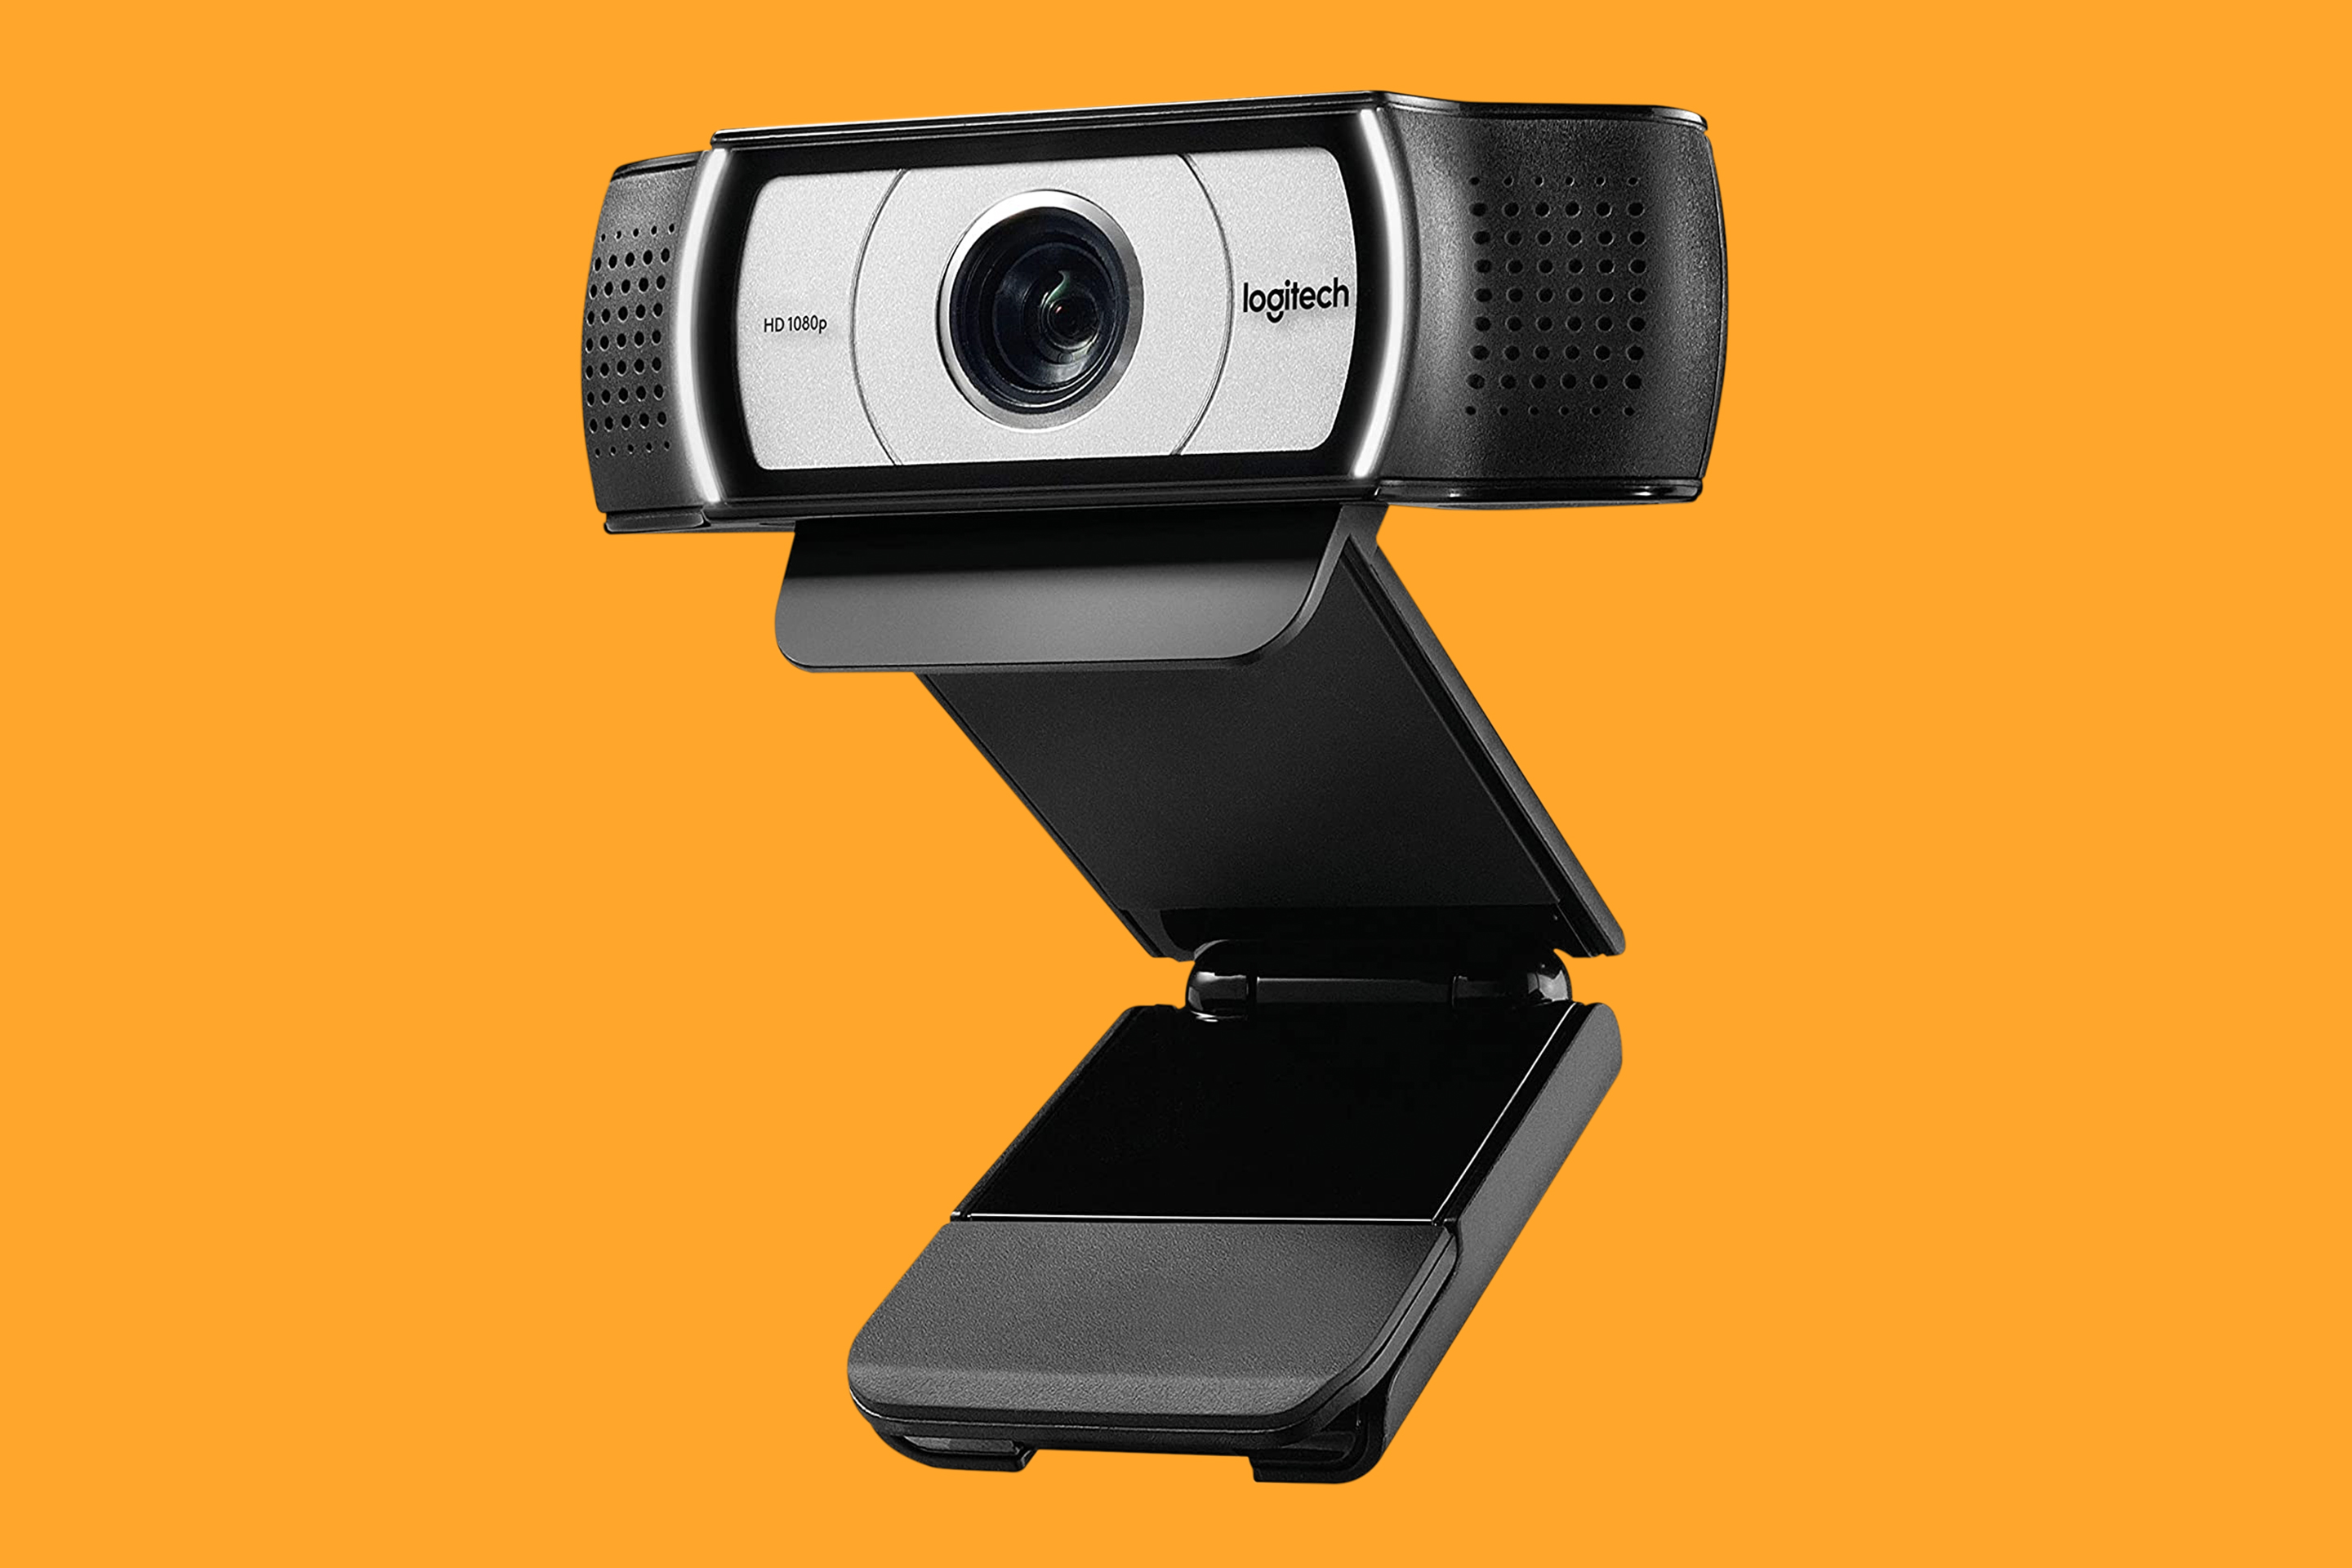 The Best Webcams for Your Money